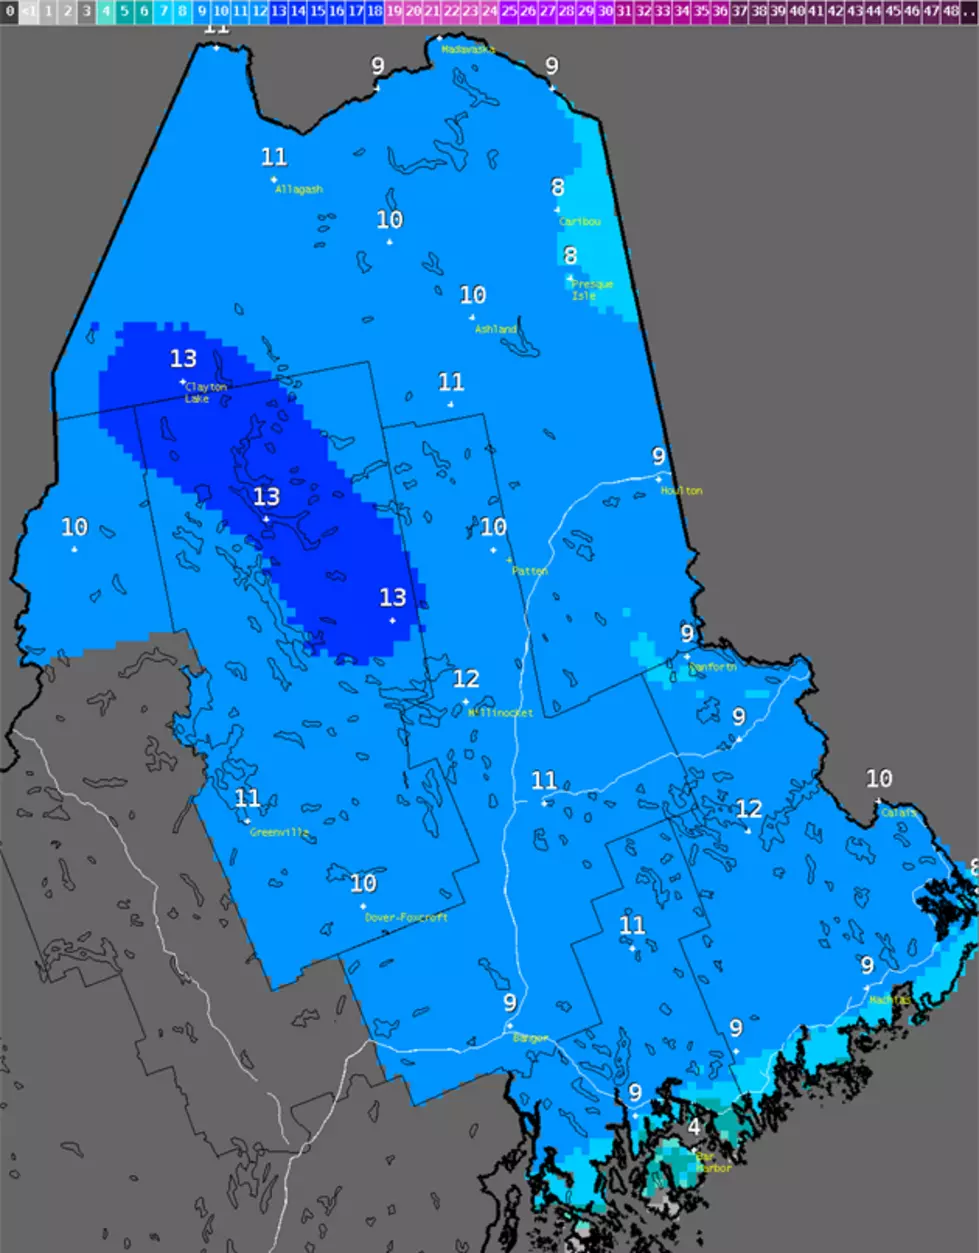 Winter Storm Warning Issued for Bangor, More Snow Expected [UPDATE]